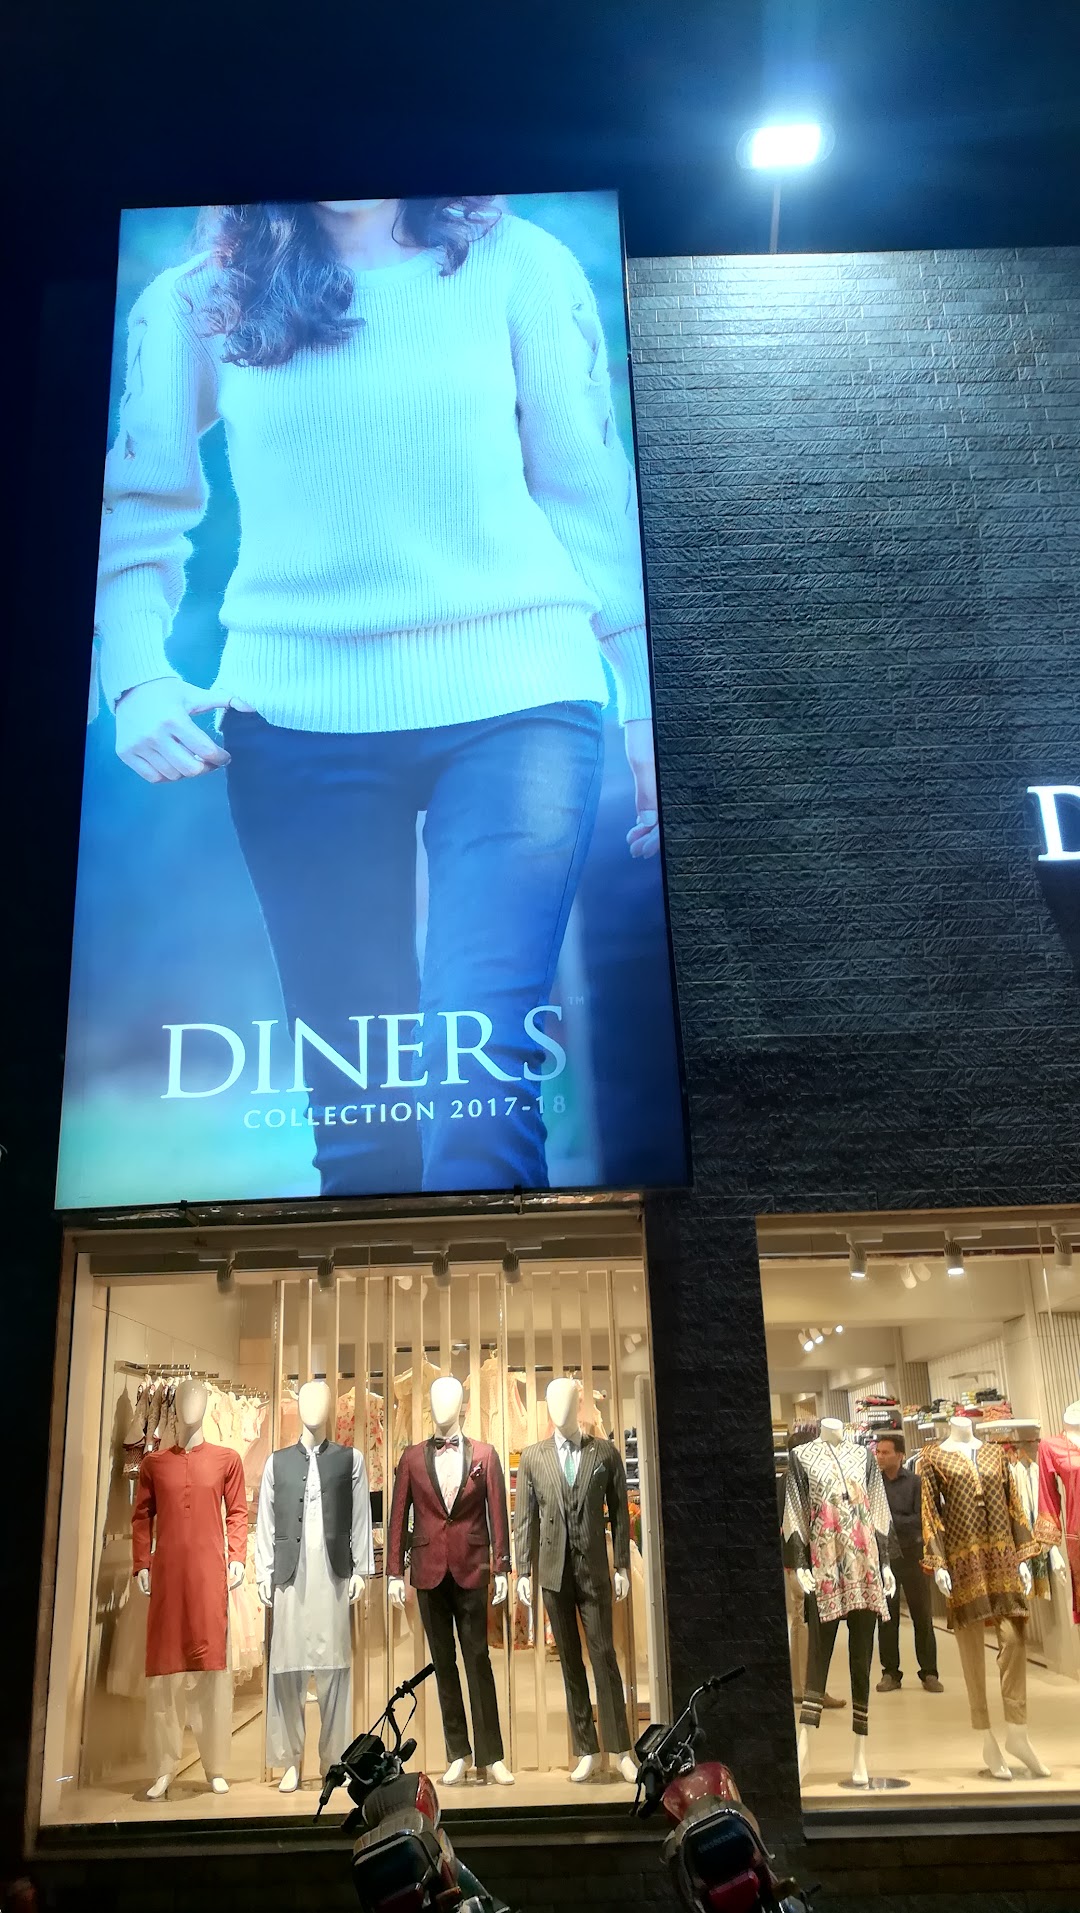 The Diners Shop